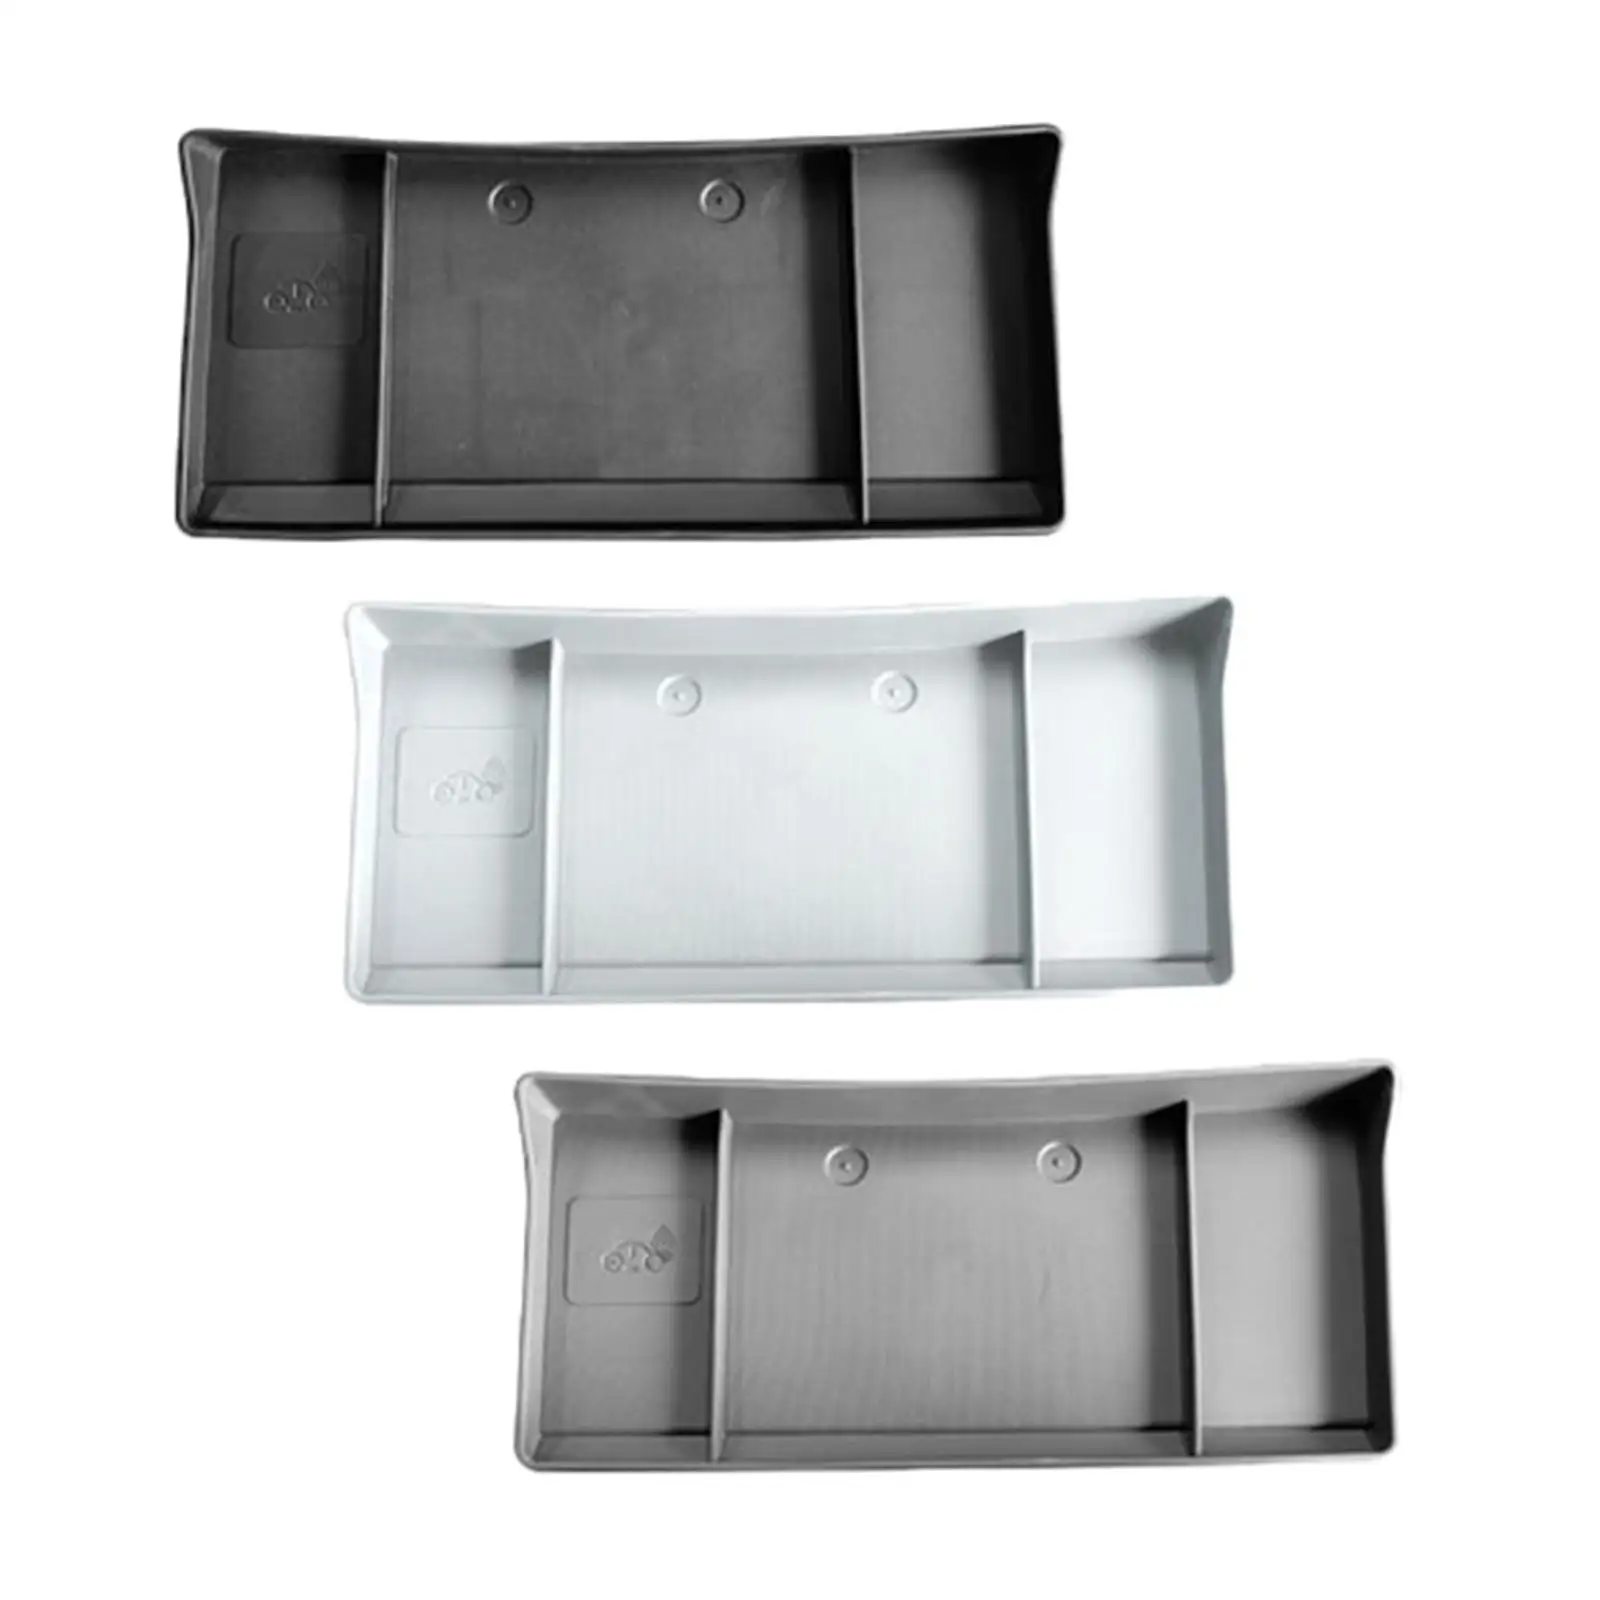 Center Screen Console Tray Organizer for Storing Glasses Paper Towel Behind Screen Storage Tray Fits for  Y Spare Parts